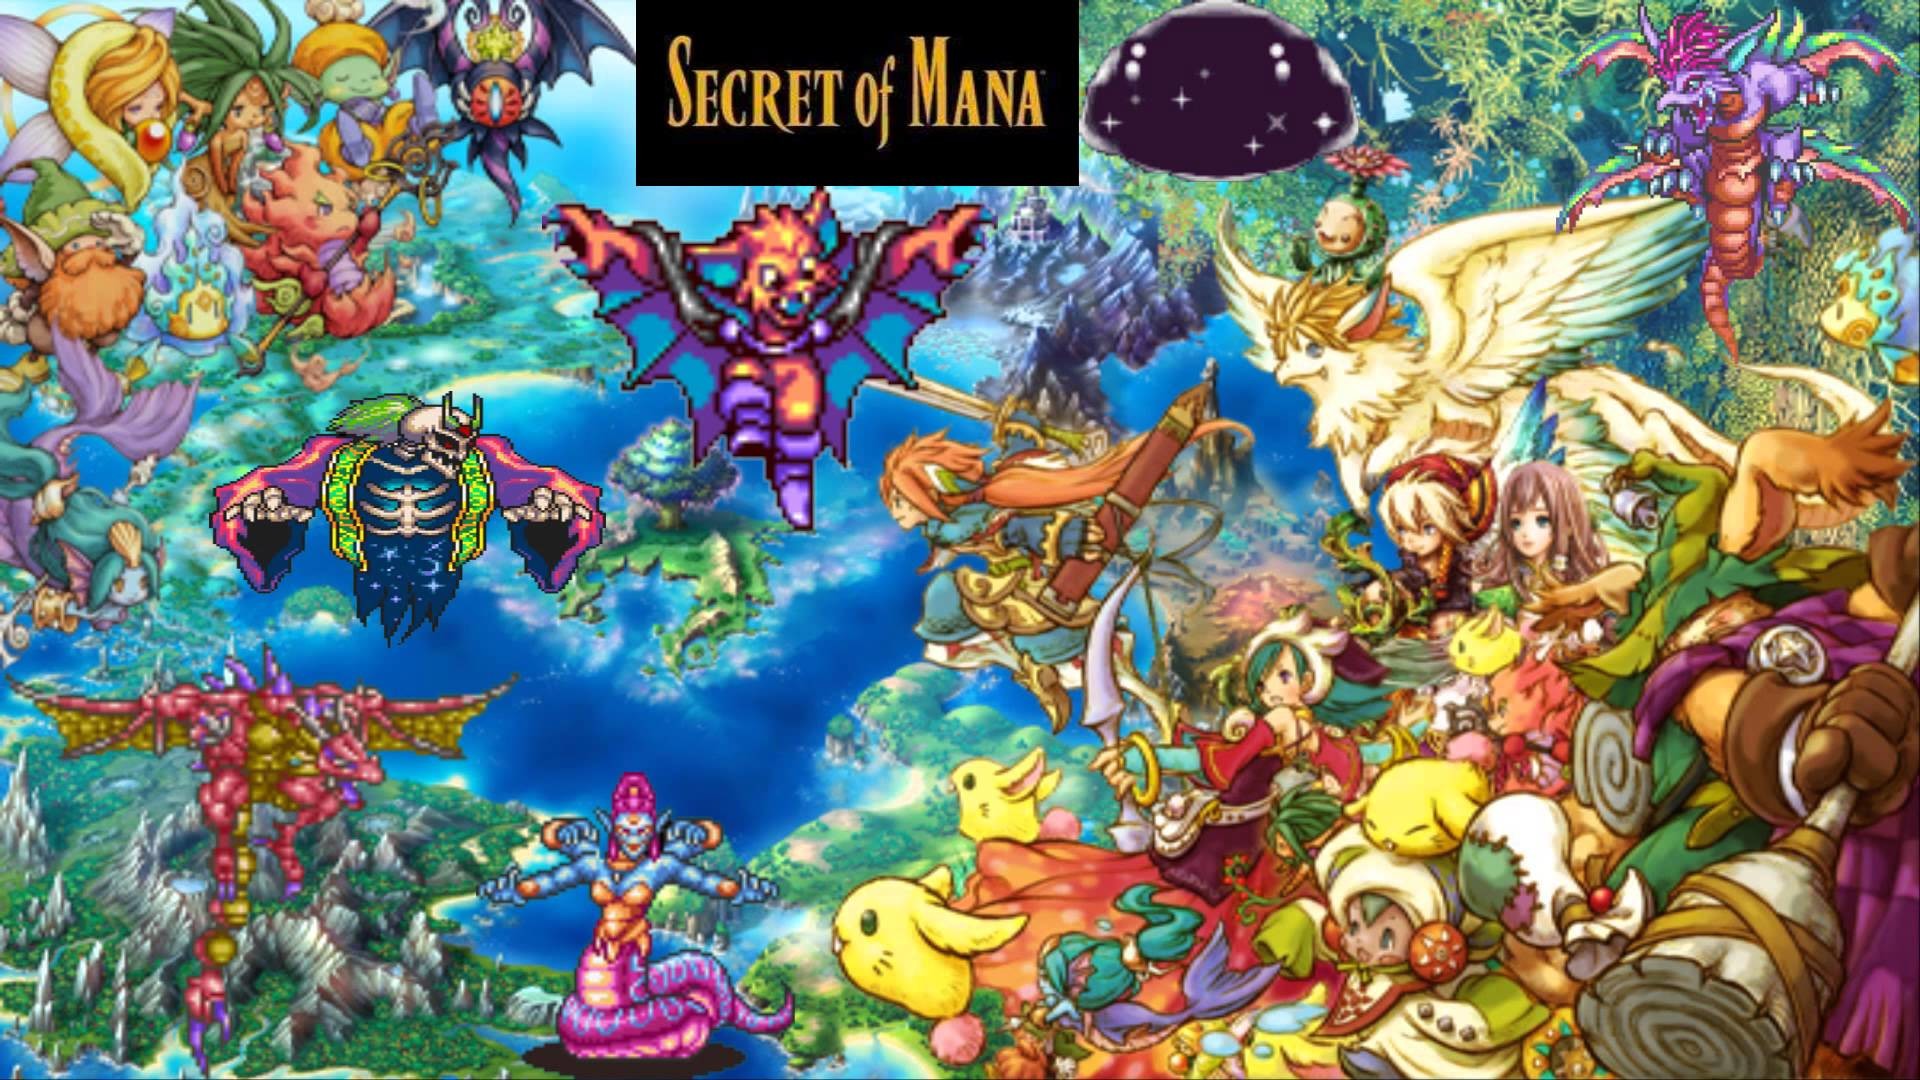 1920x1080 Let's Play Again Secret of Mana - Cover - YouTube